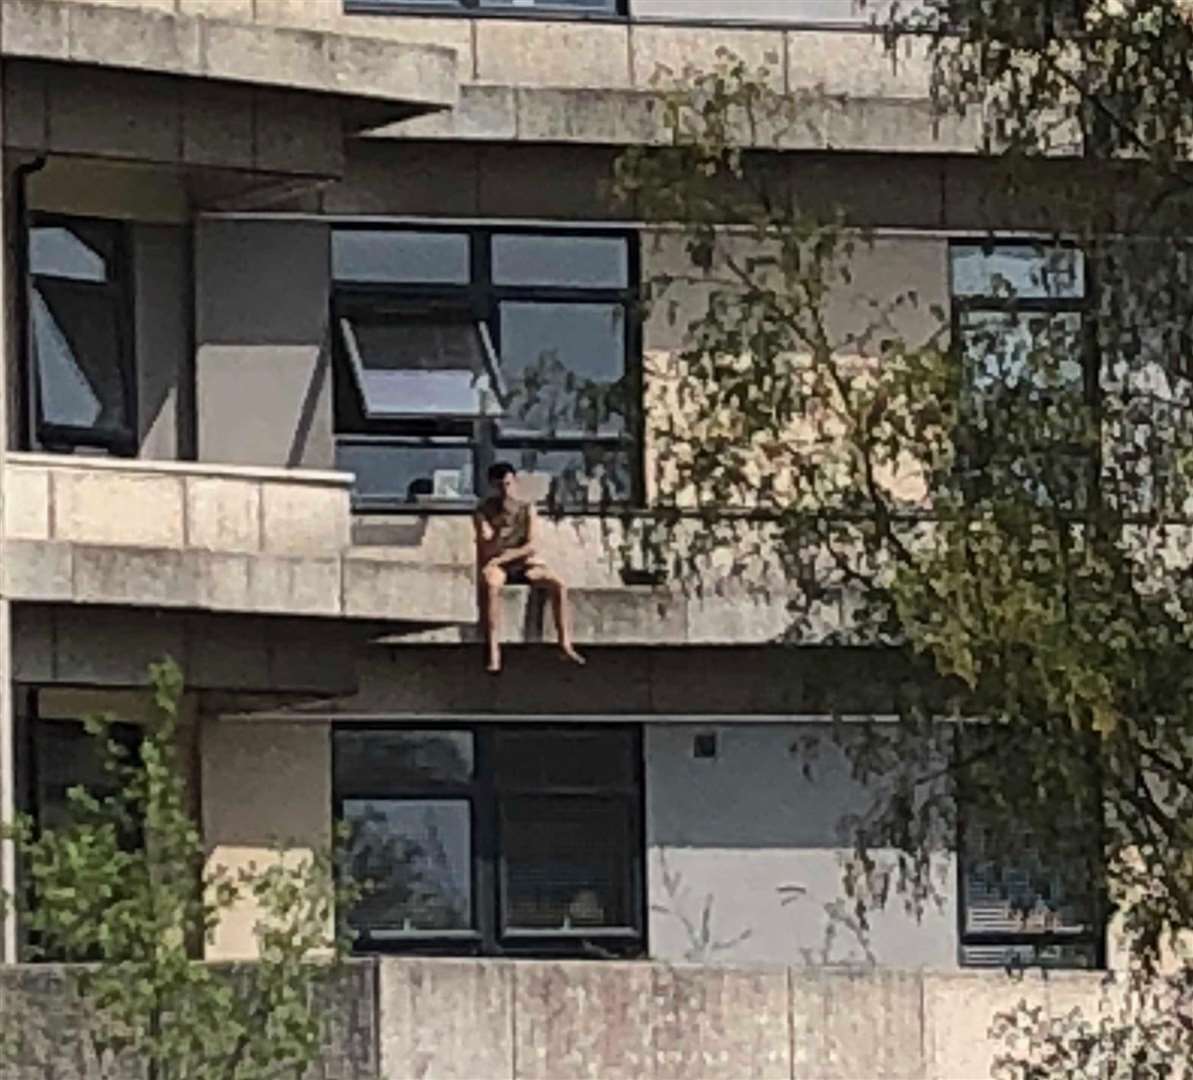 The man was spotted on the edge of The Panorama building